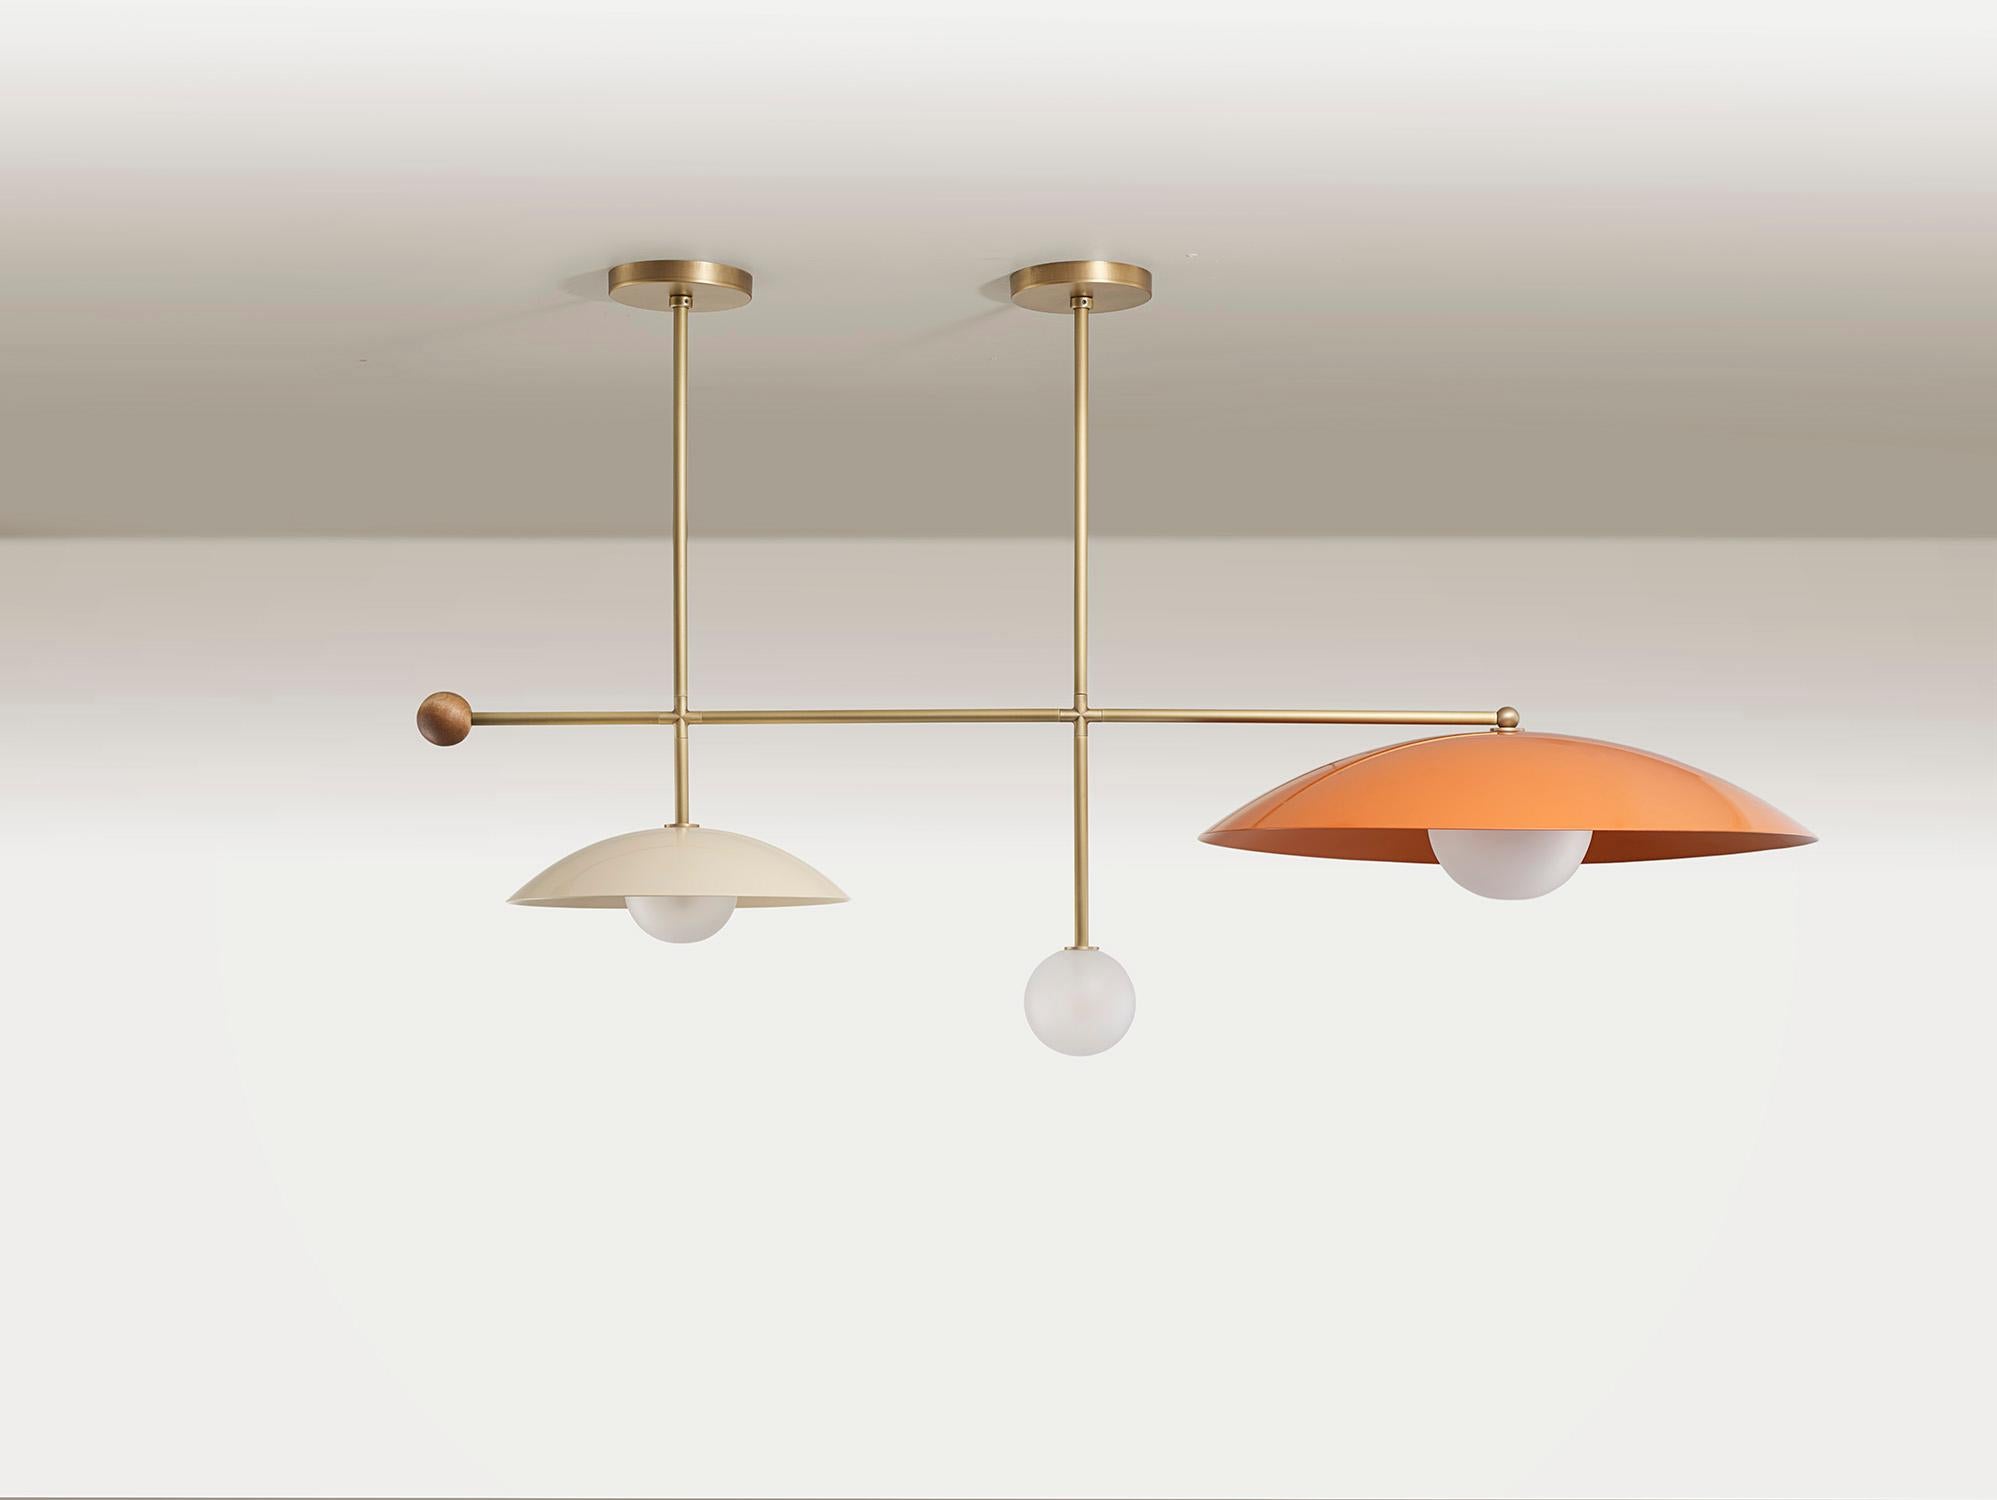 CORSA Chandelier in Enamel, Brass & Walnut, Ginger Curtis x Blueprint Lighting In New Condition For Sale In New York, NY